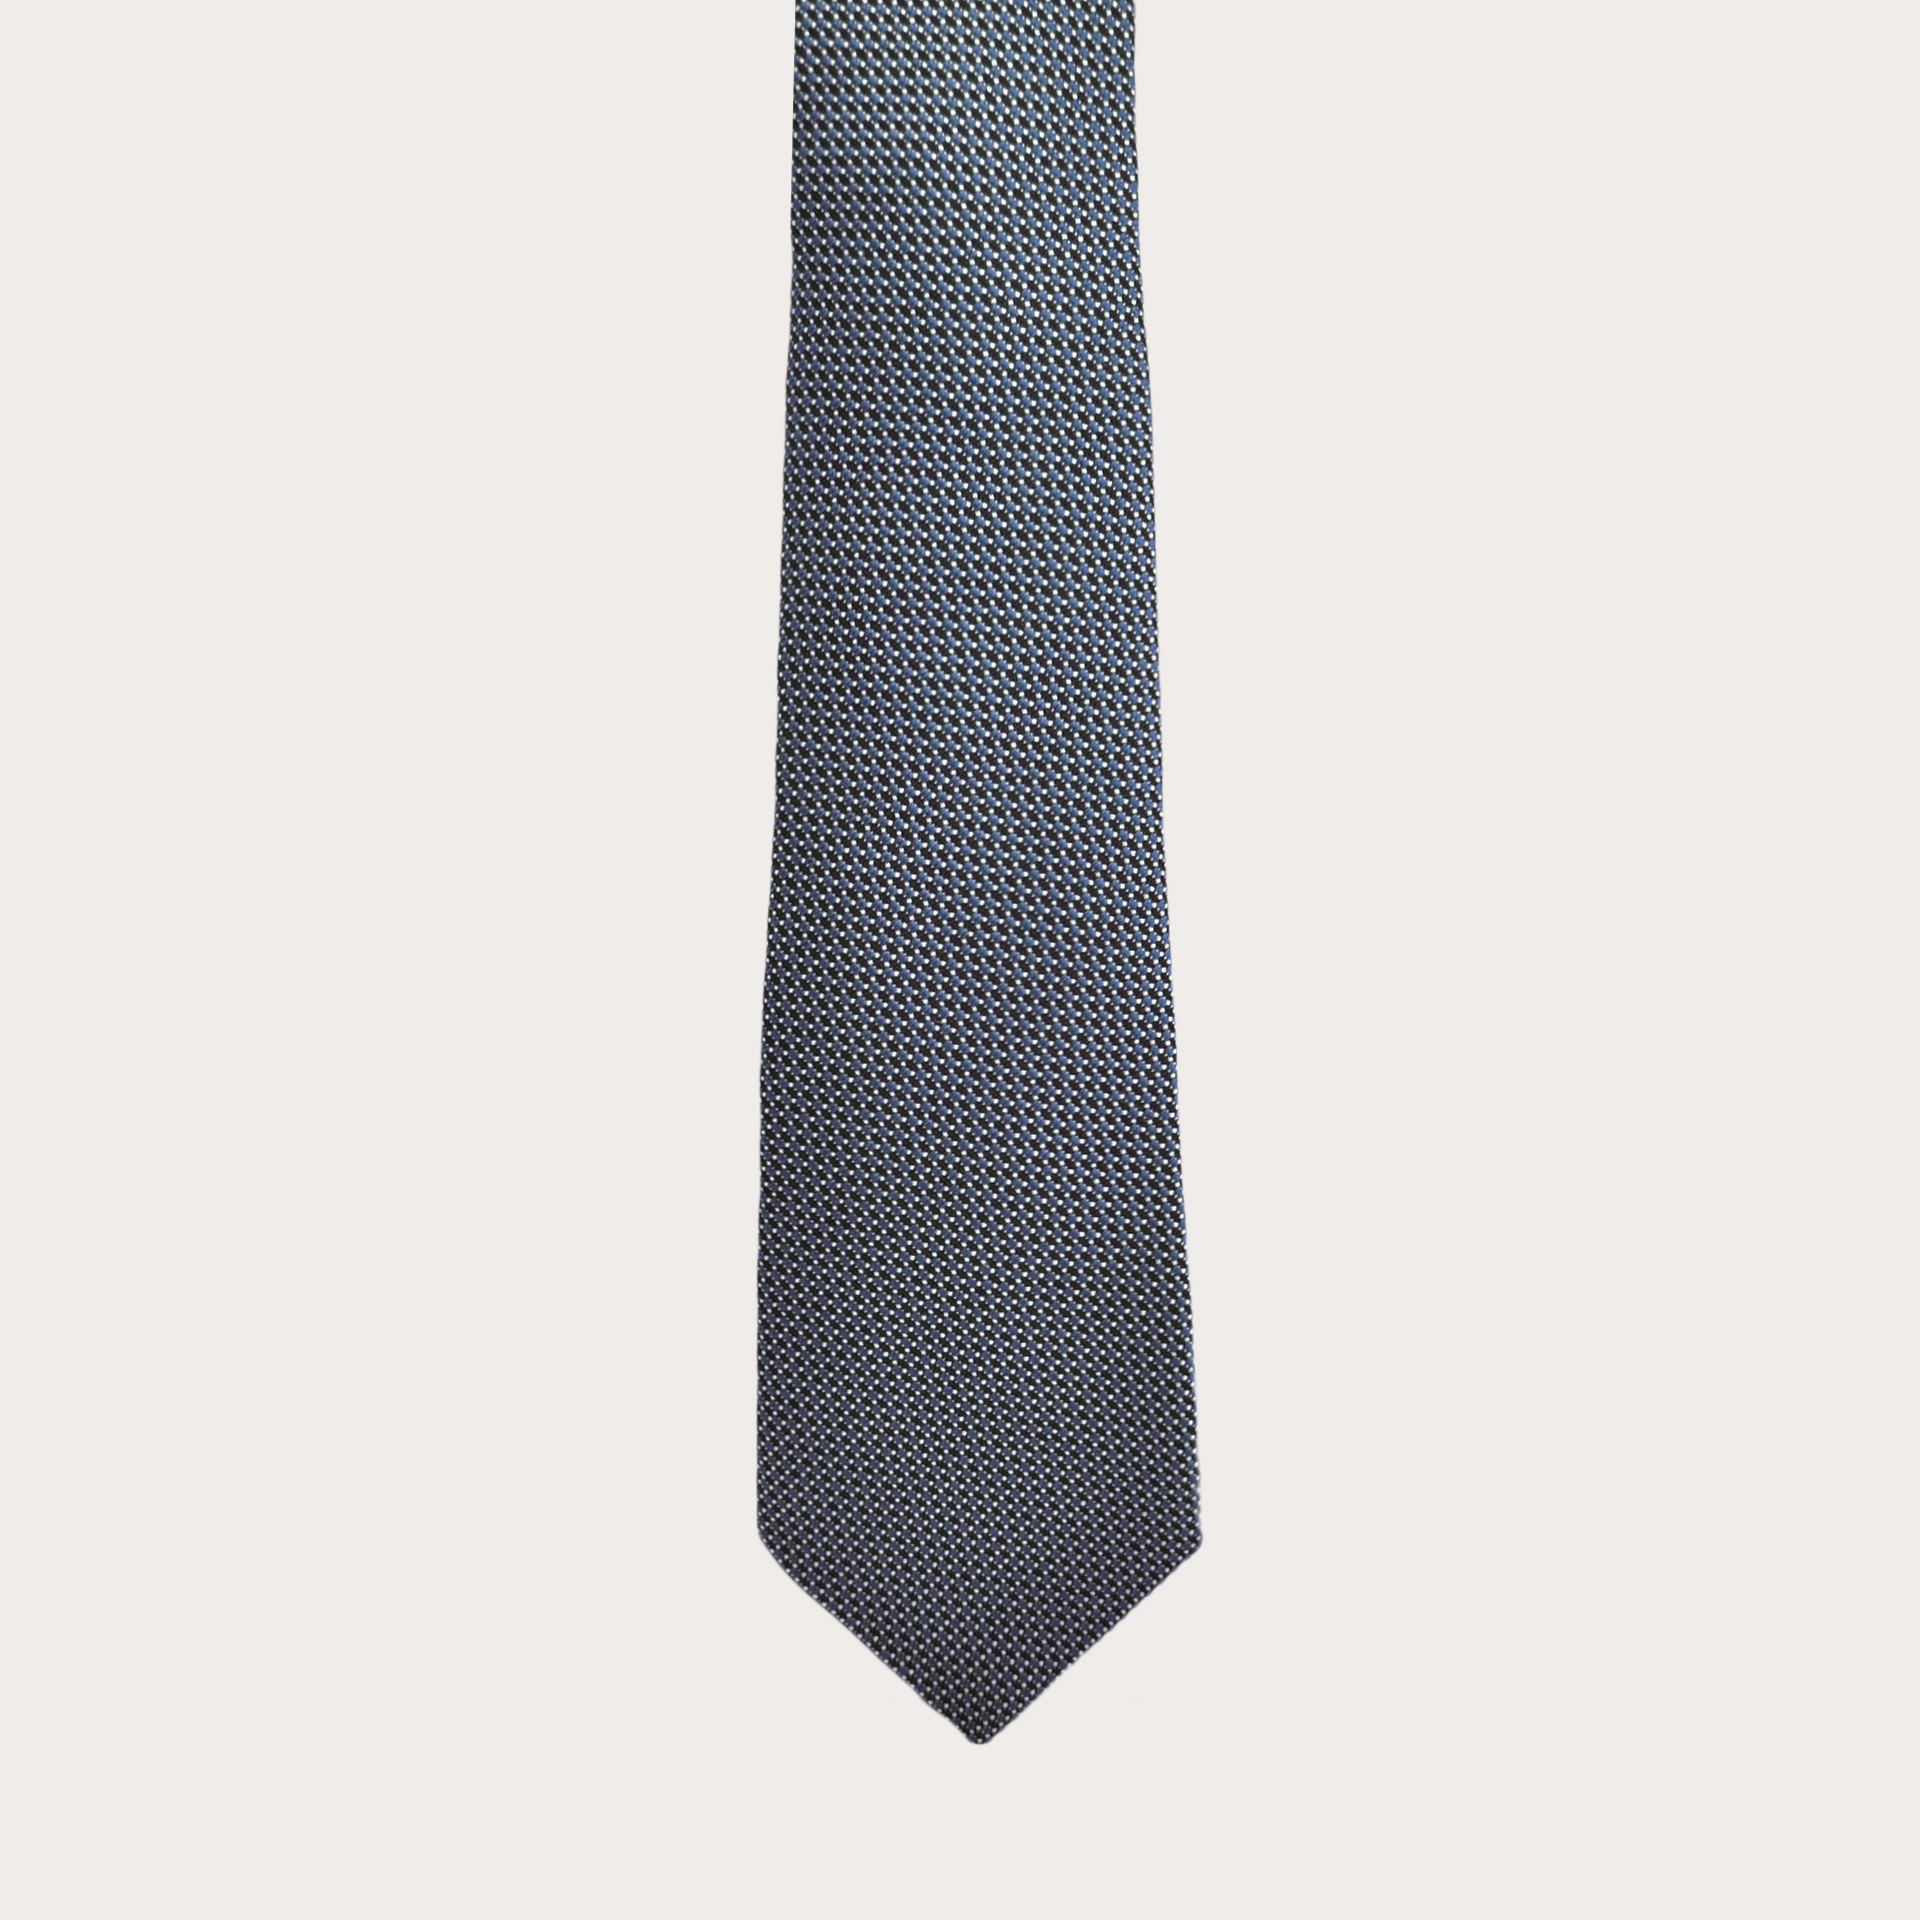 BRUCLE Jacquard silk tie, light blue dotted